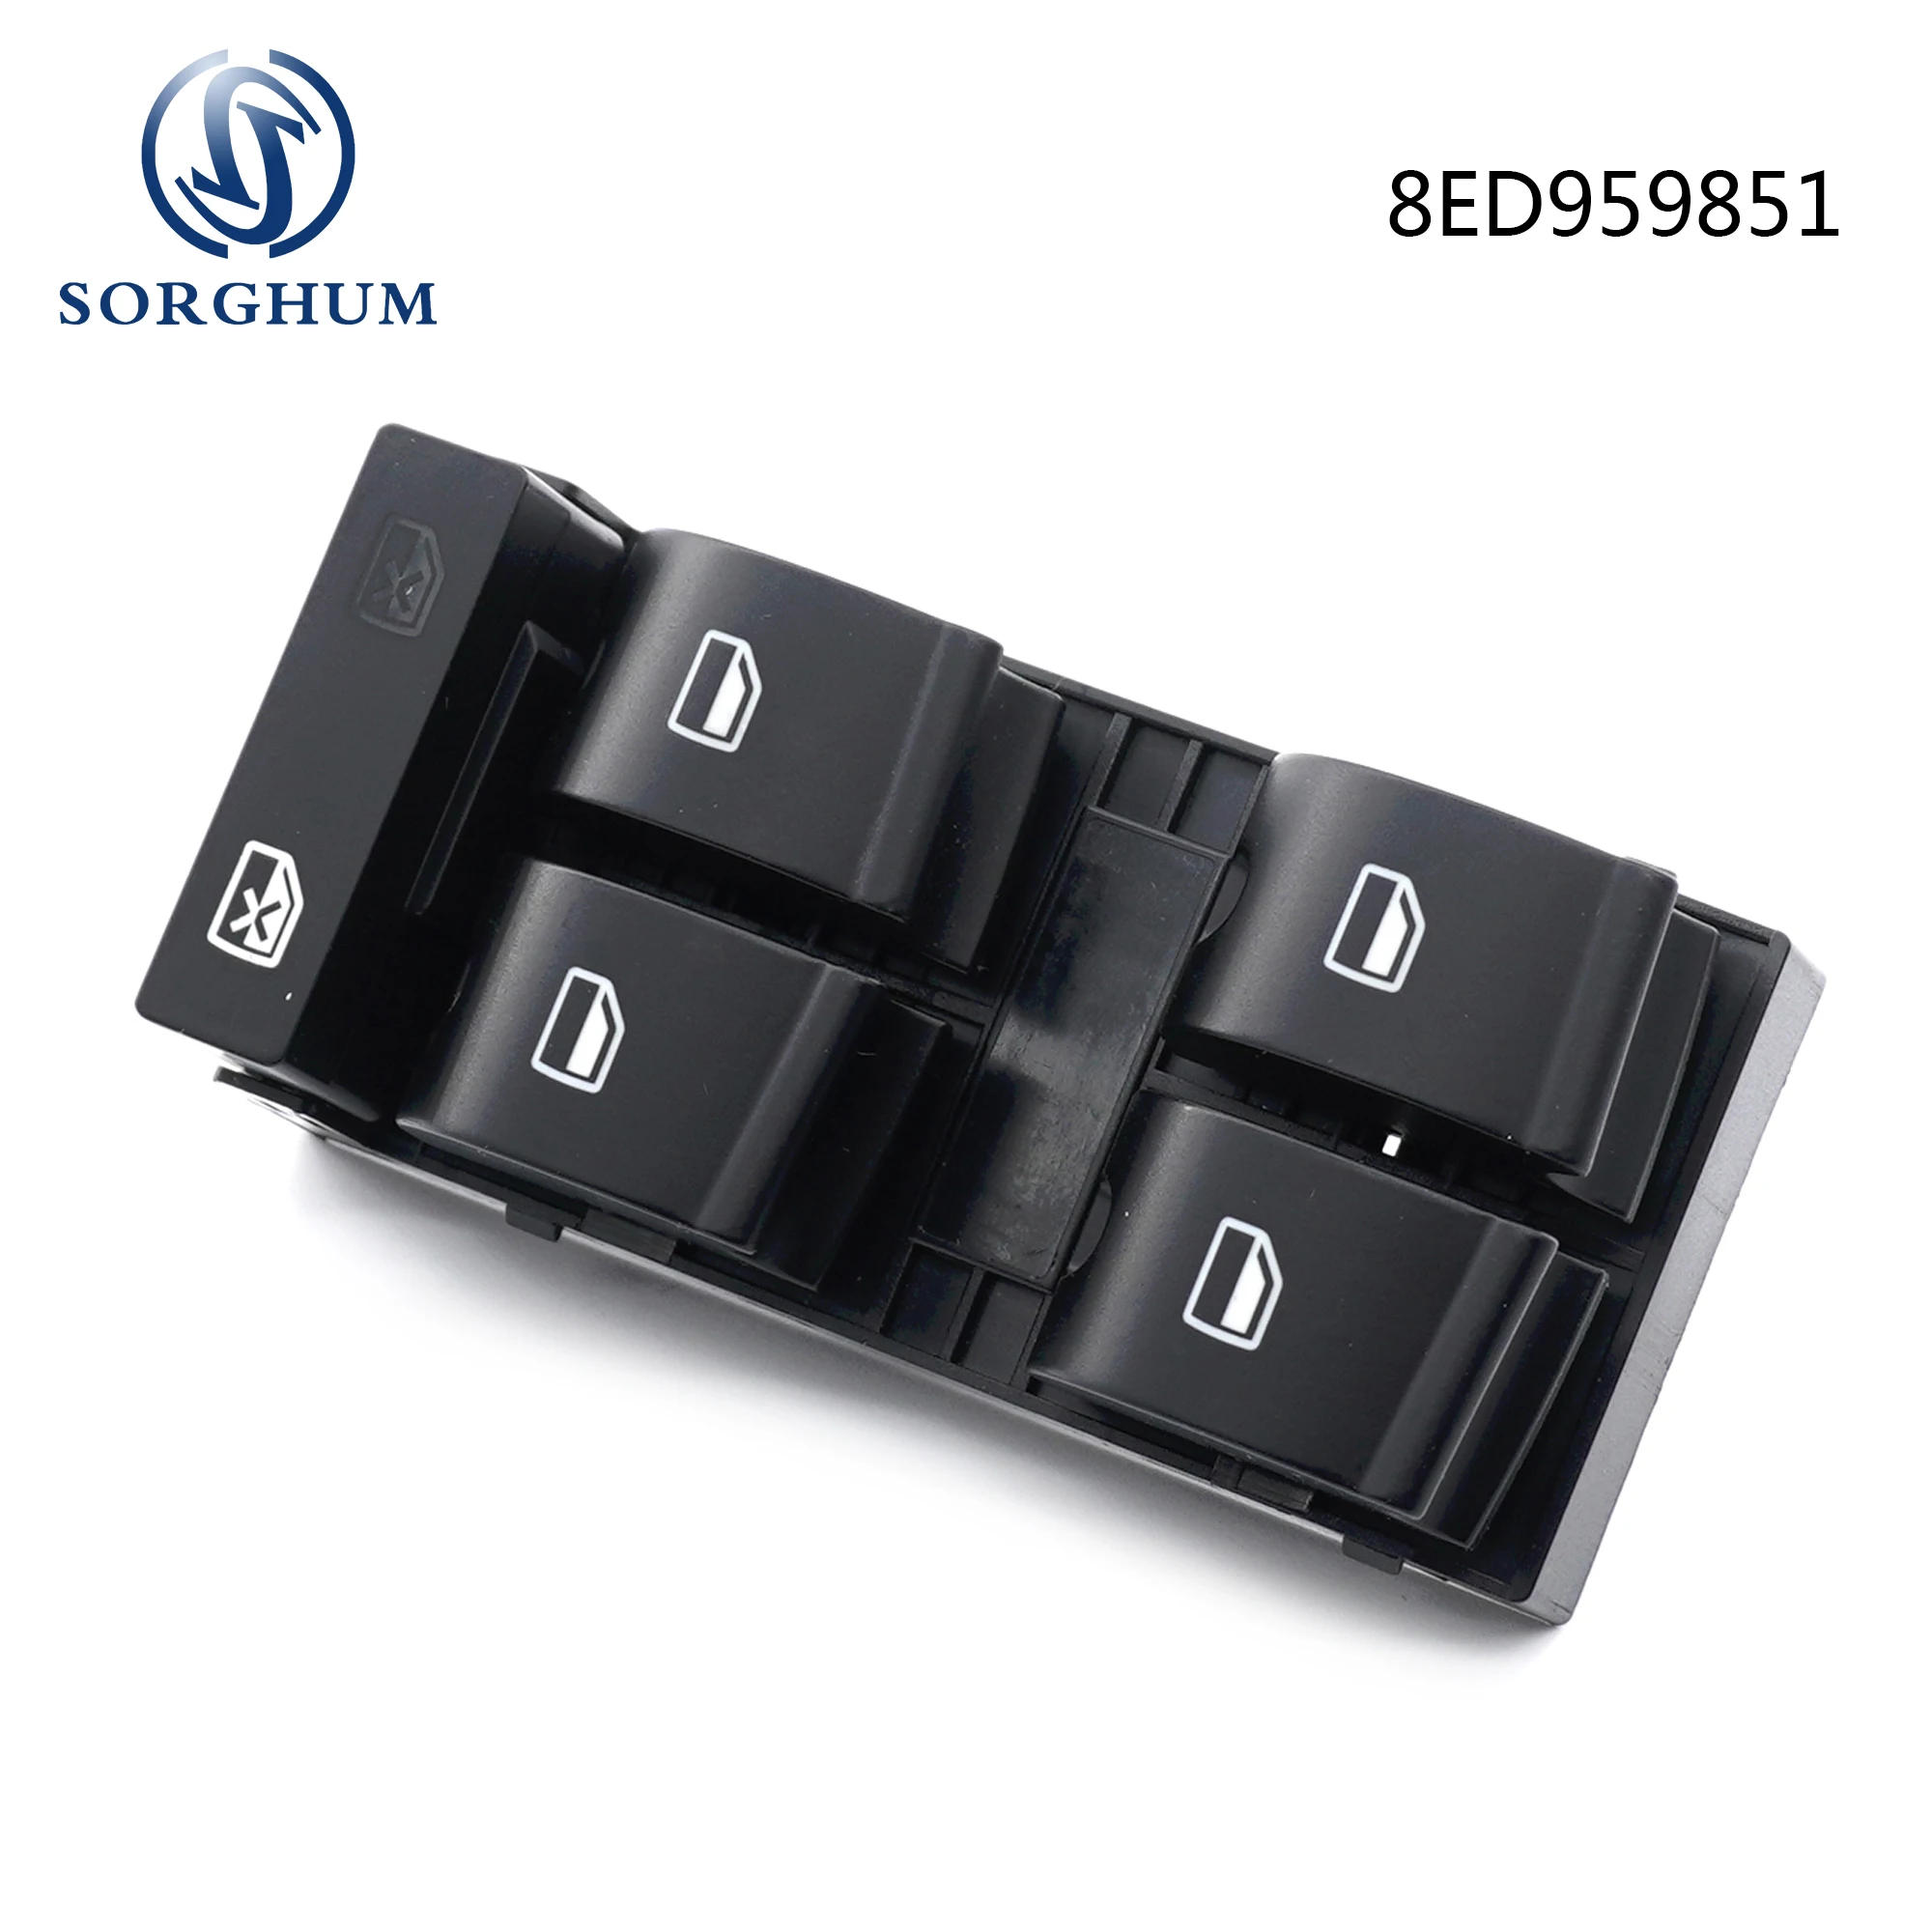 

SORGHUM 8E0959851B New Electric Master Power Window Control Switch For Audi A4 S4 B6 B7 RS4 2002-2008 8ED 959851D 8ED959851